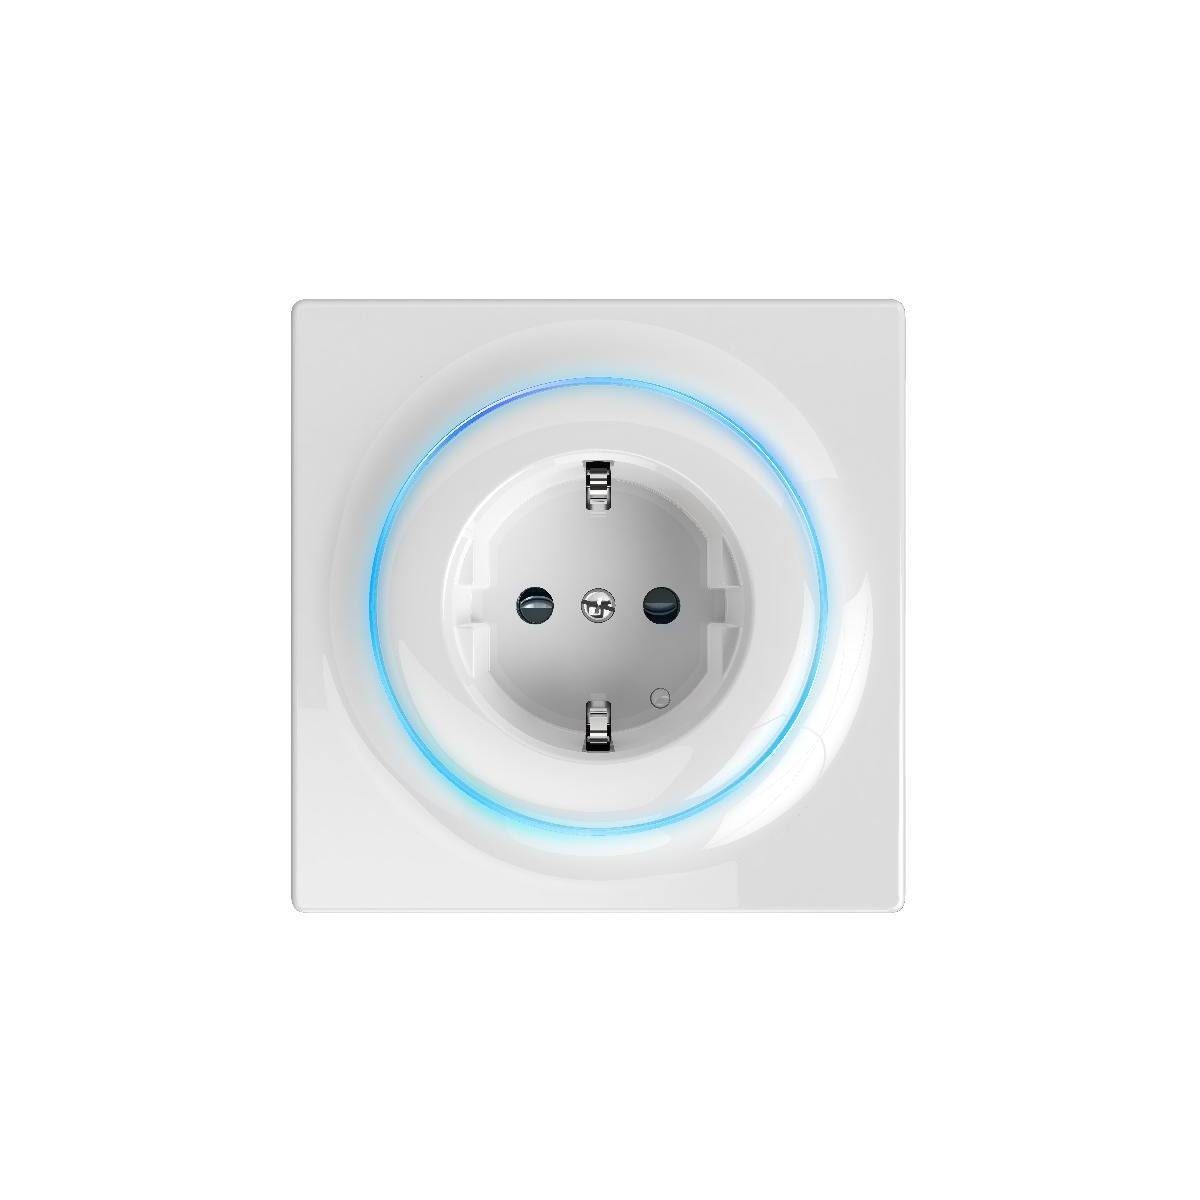 Fibaro FGWOF-011 - Walli Outlet (Typ F) Smart-Home-Steuerelement